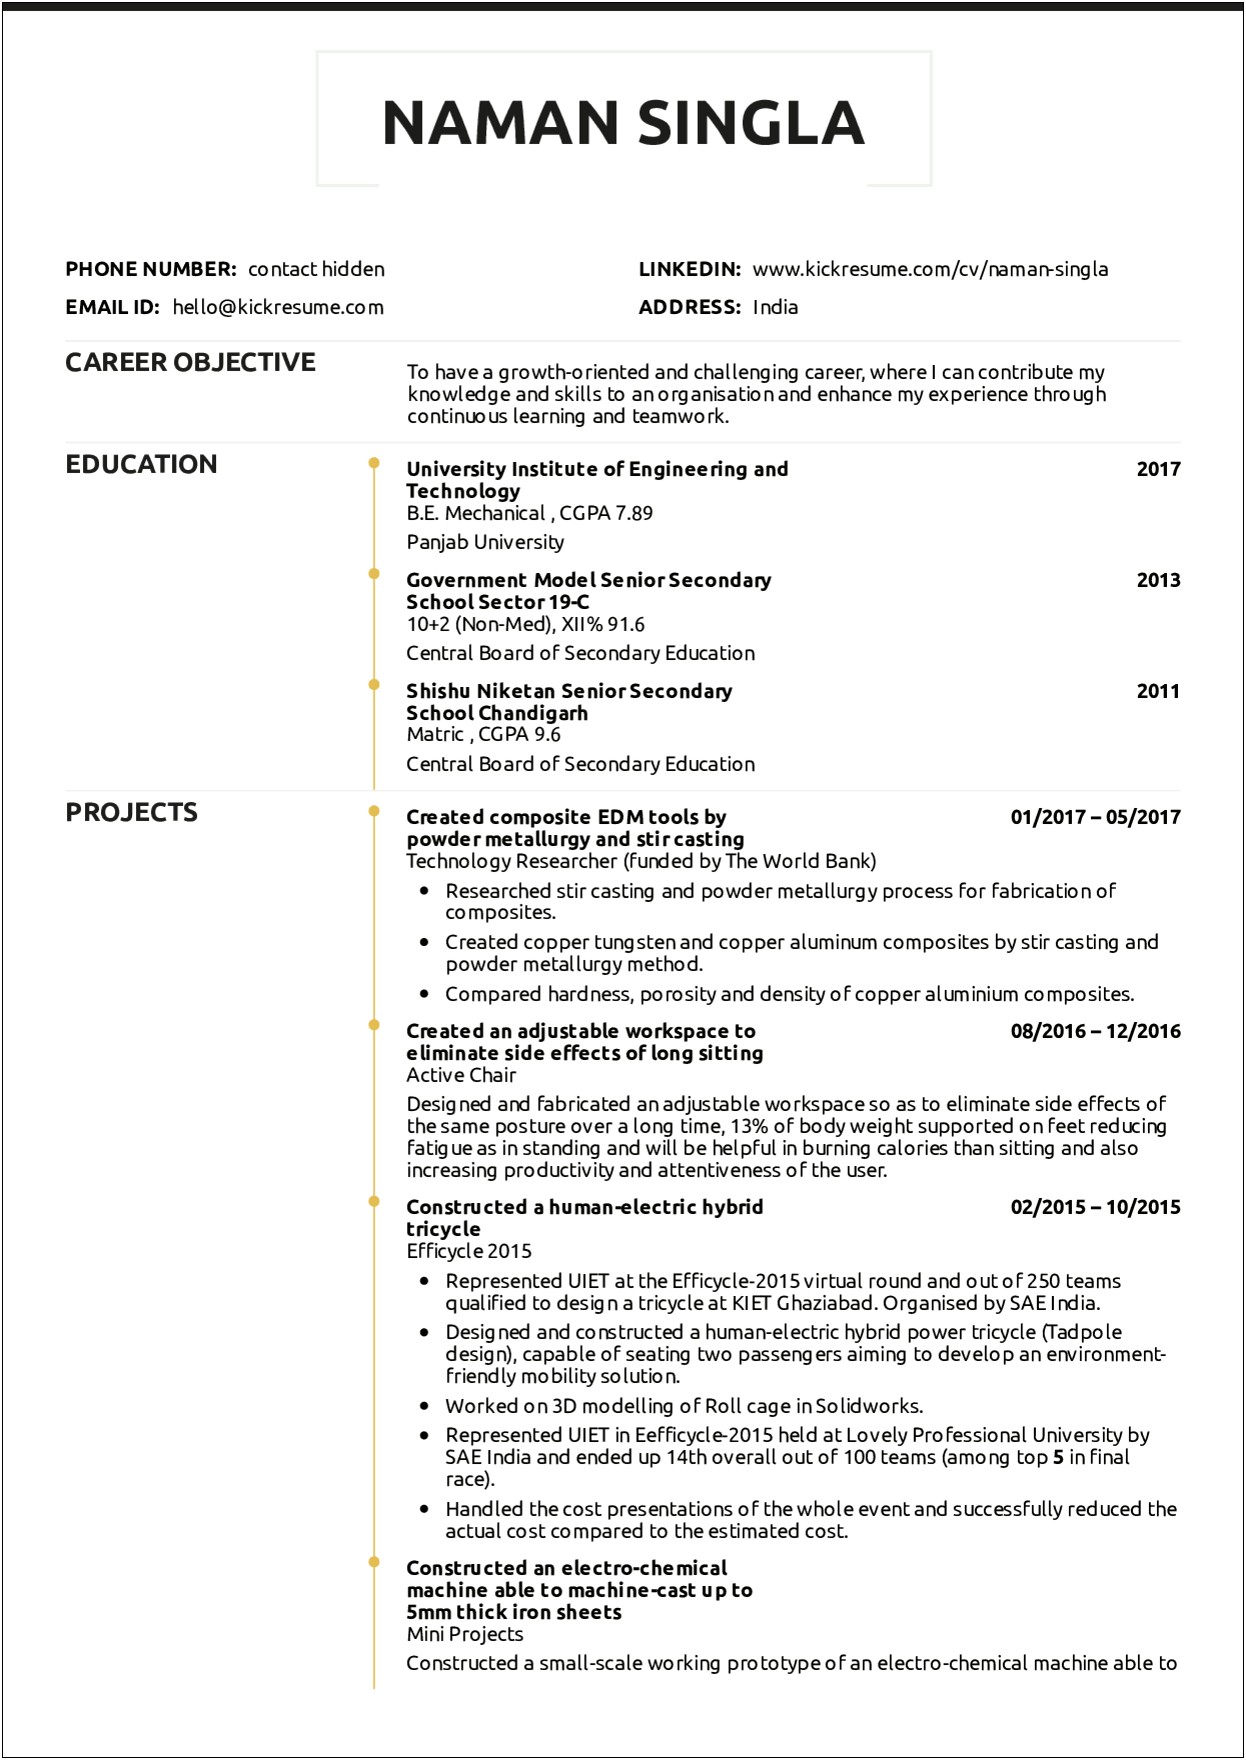 Resume Objective For Bank Teller With No Experience